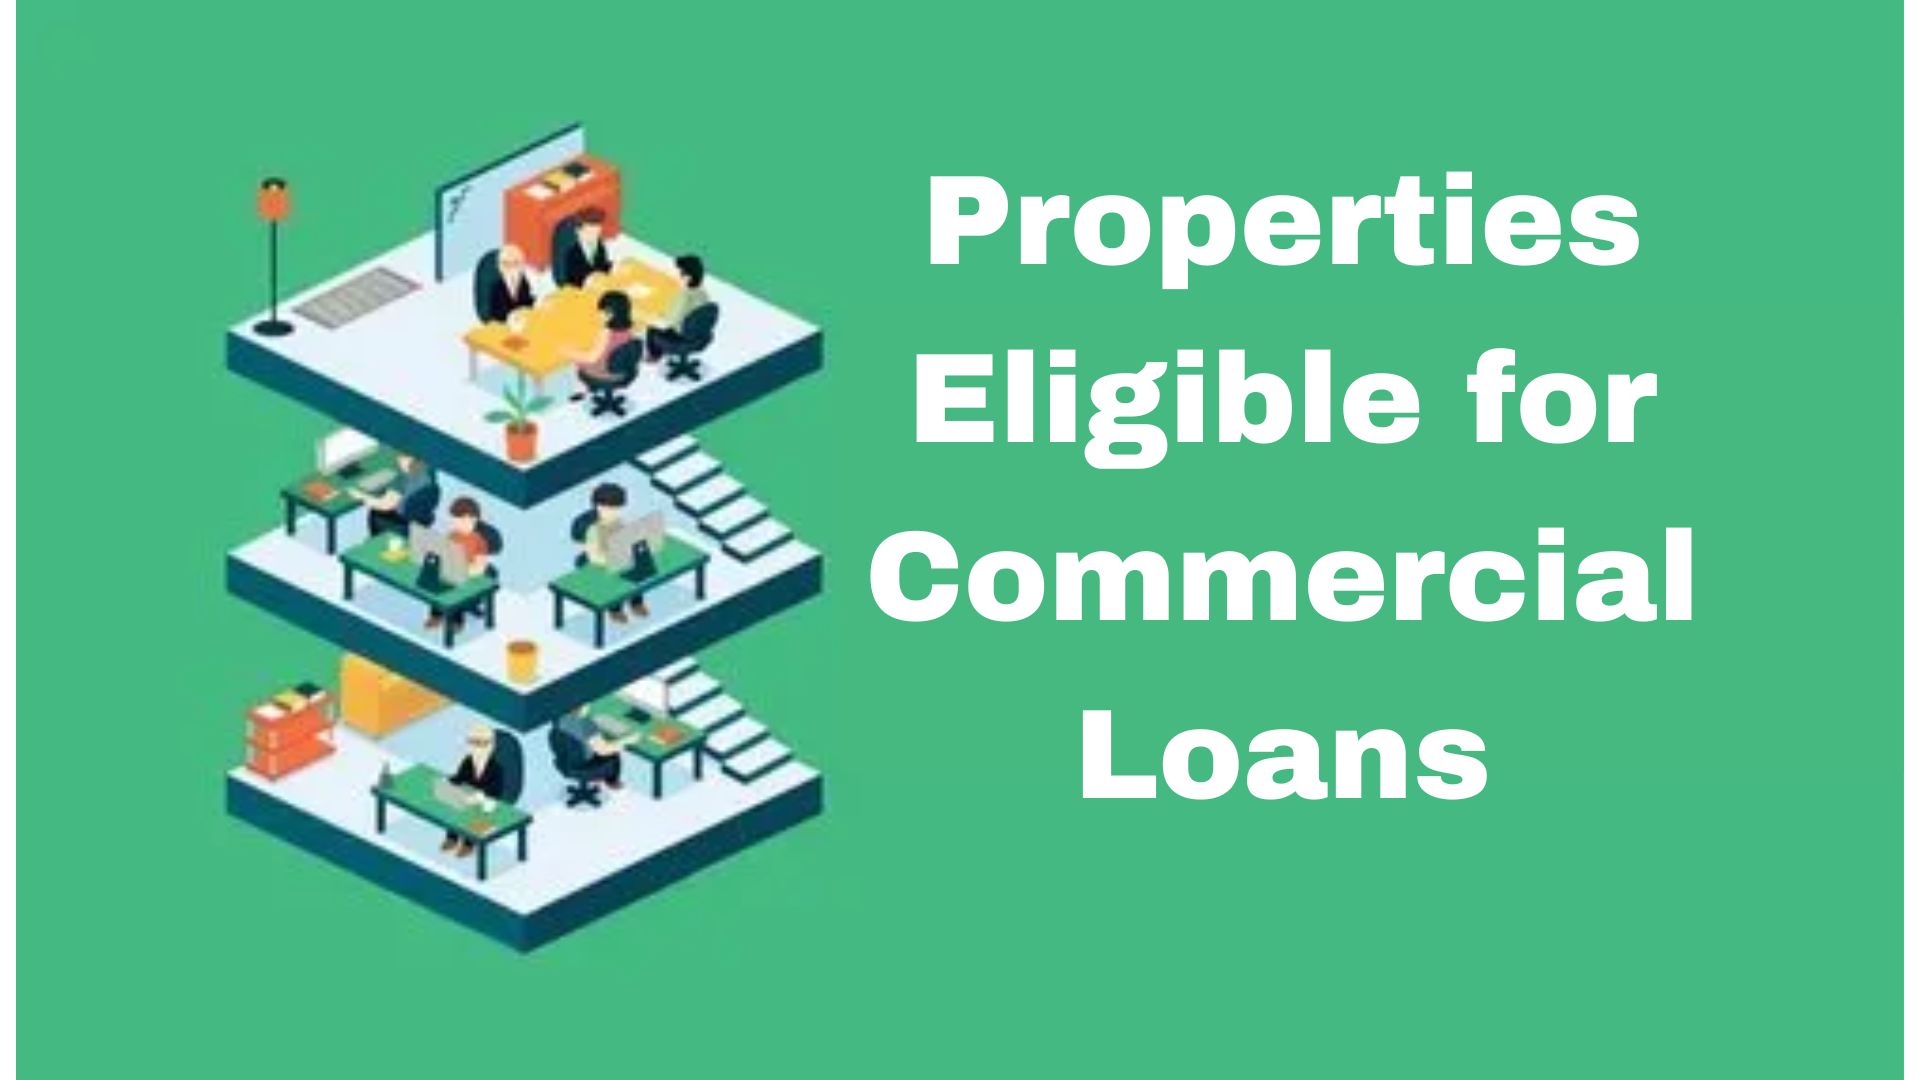 Properties Eligible for Commercial Loans